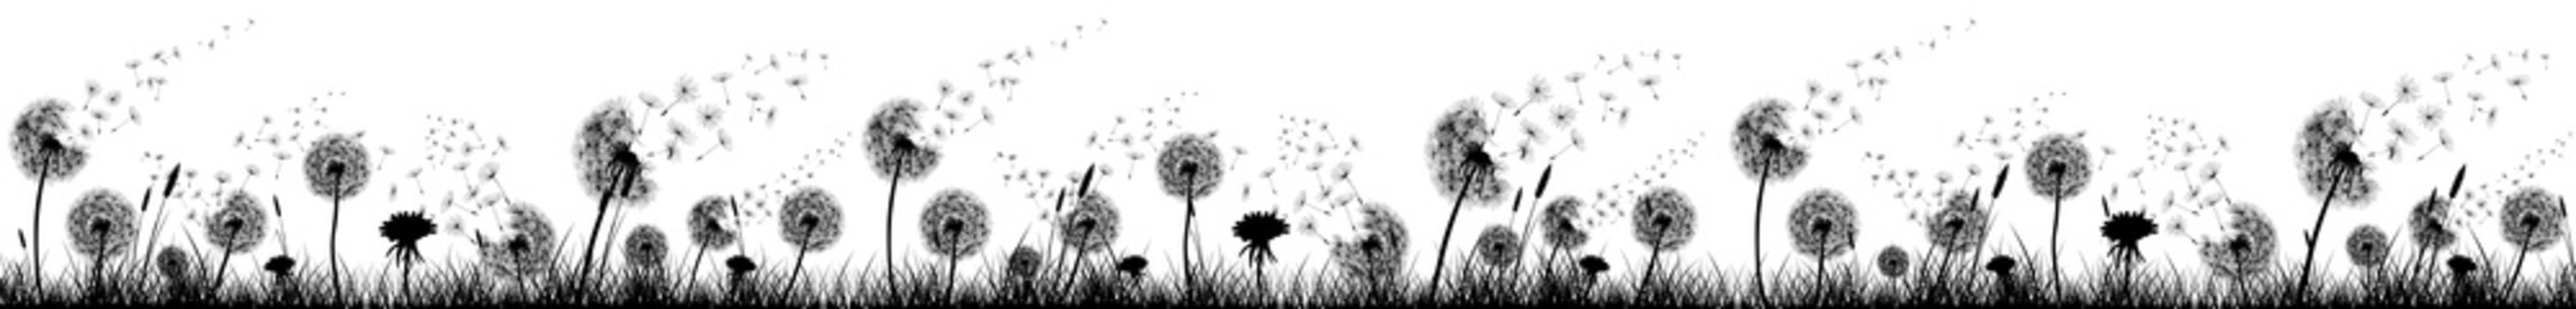 Fototapeta Dandelions, Flowers and Grass High Quality Kitchen Design - Silhouette / Shapes - Black and White Background